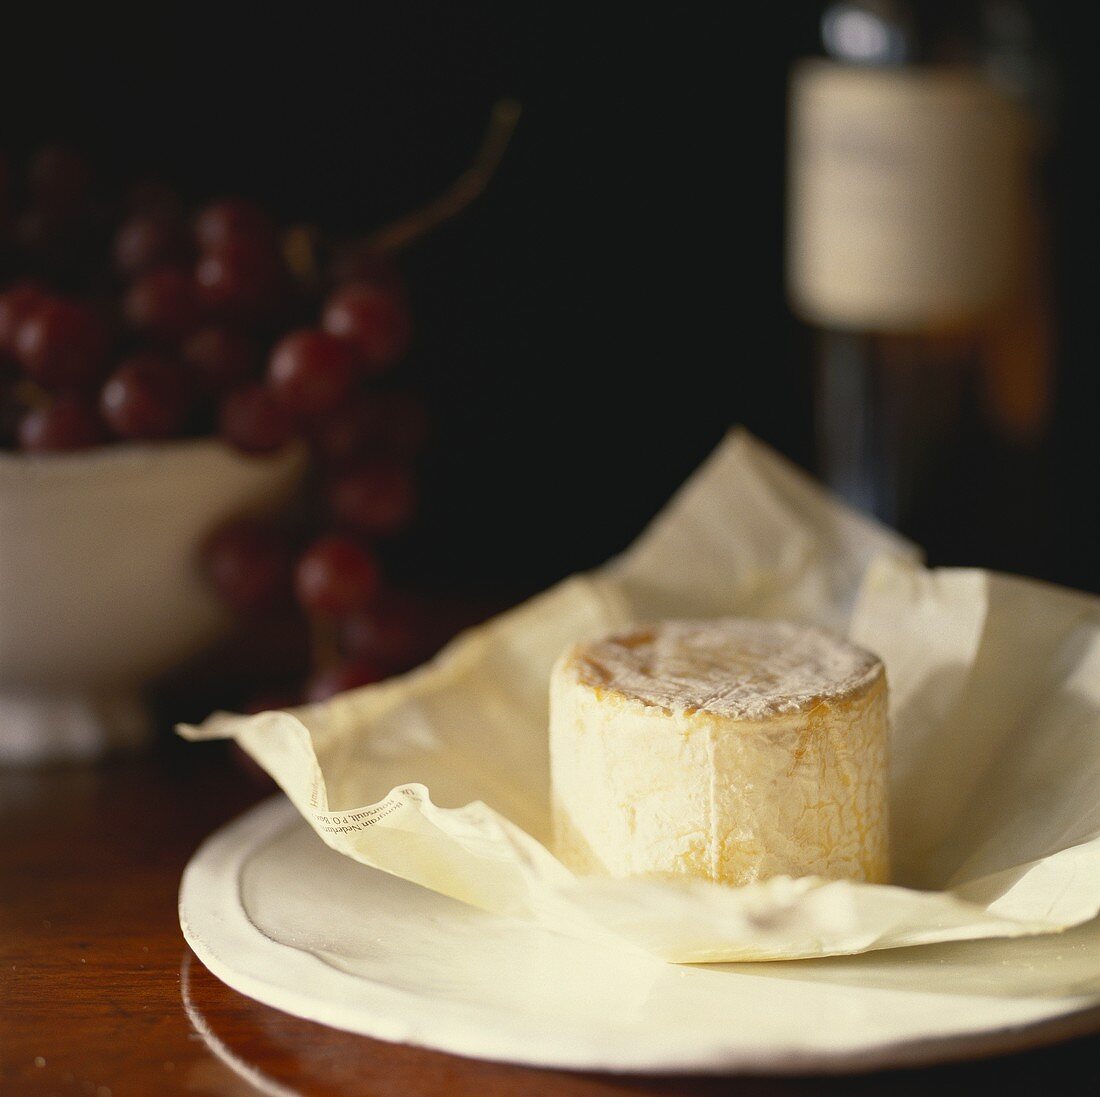 English goat's cheese on paper; red grapes